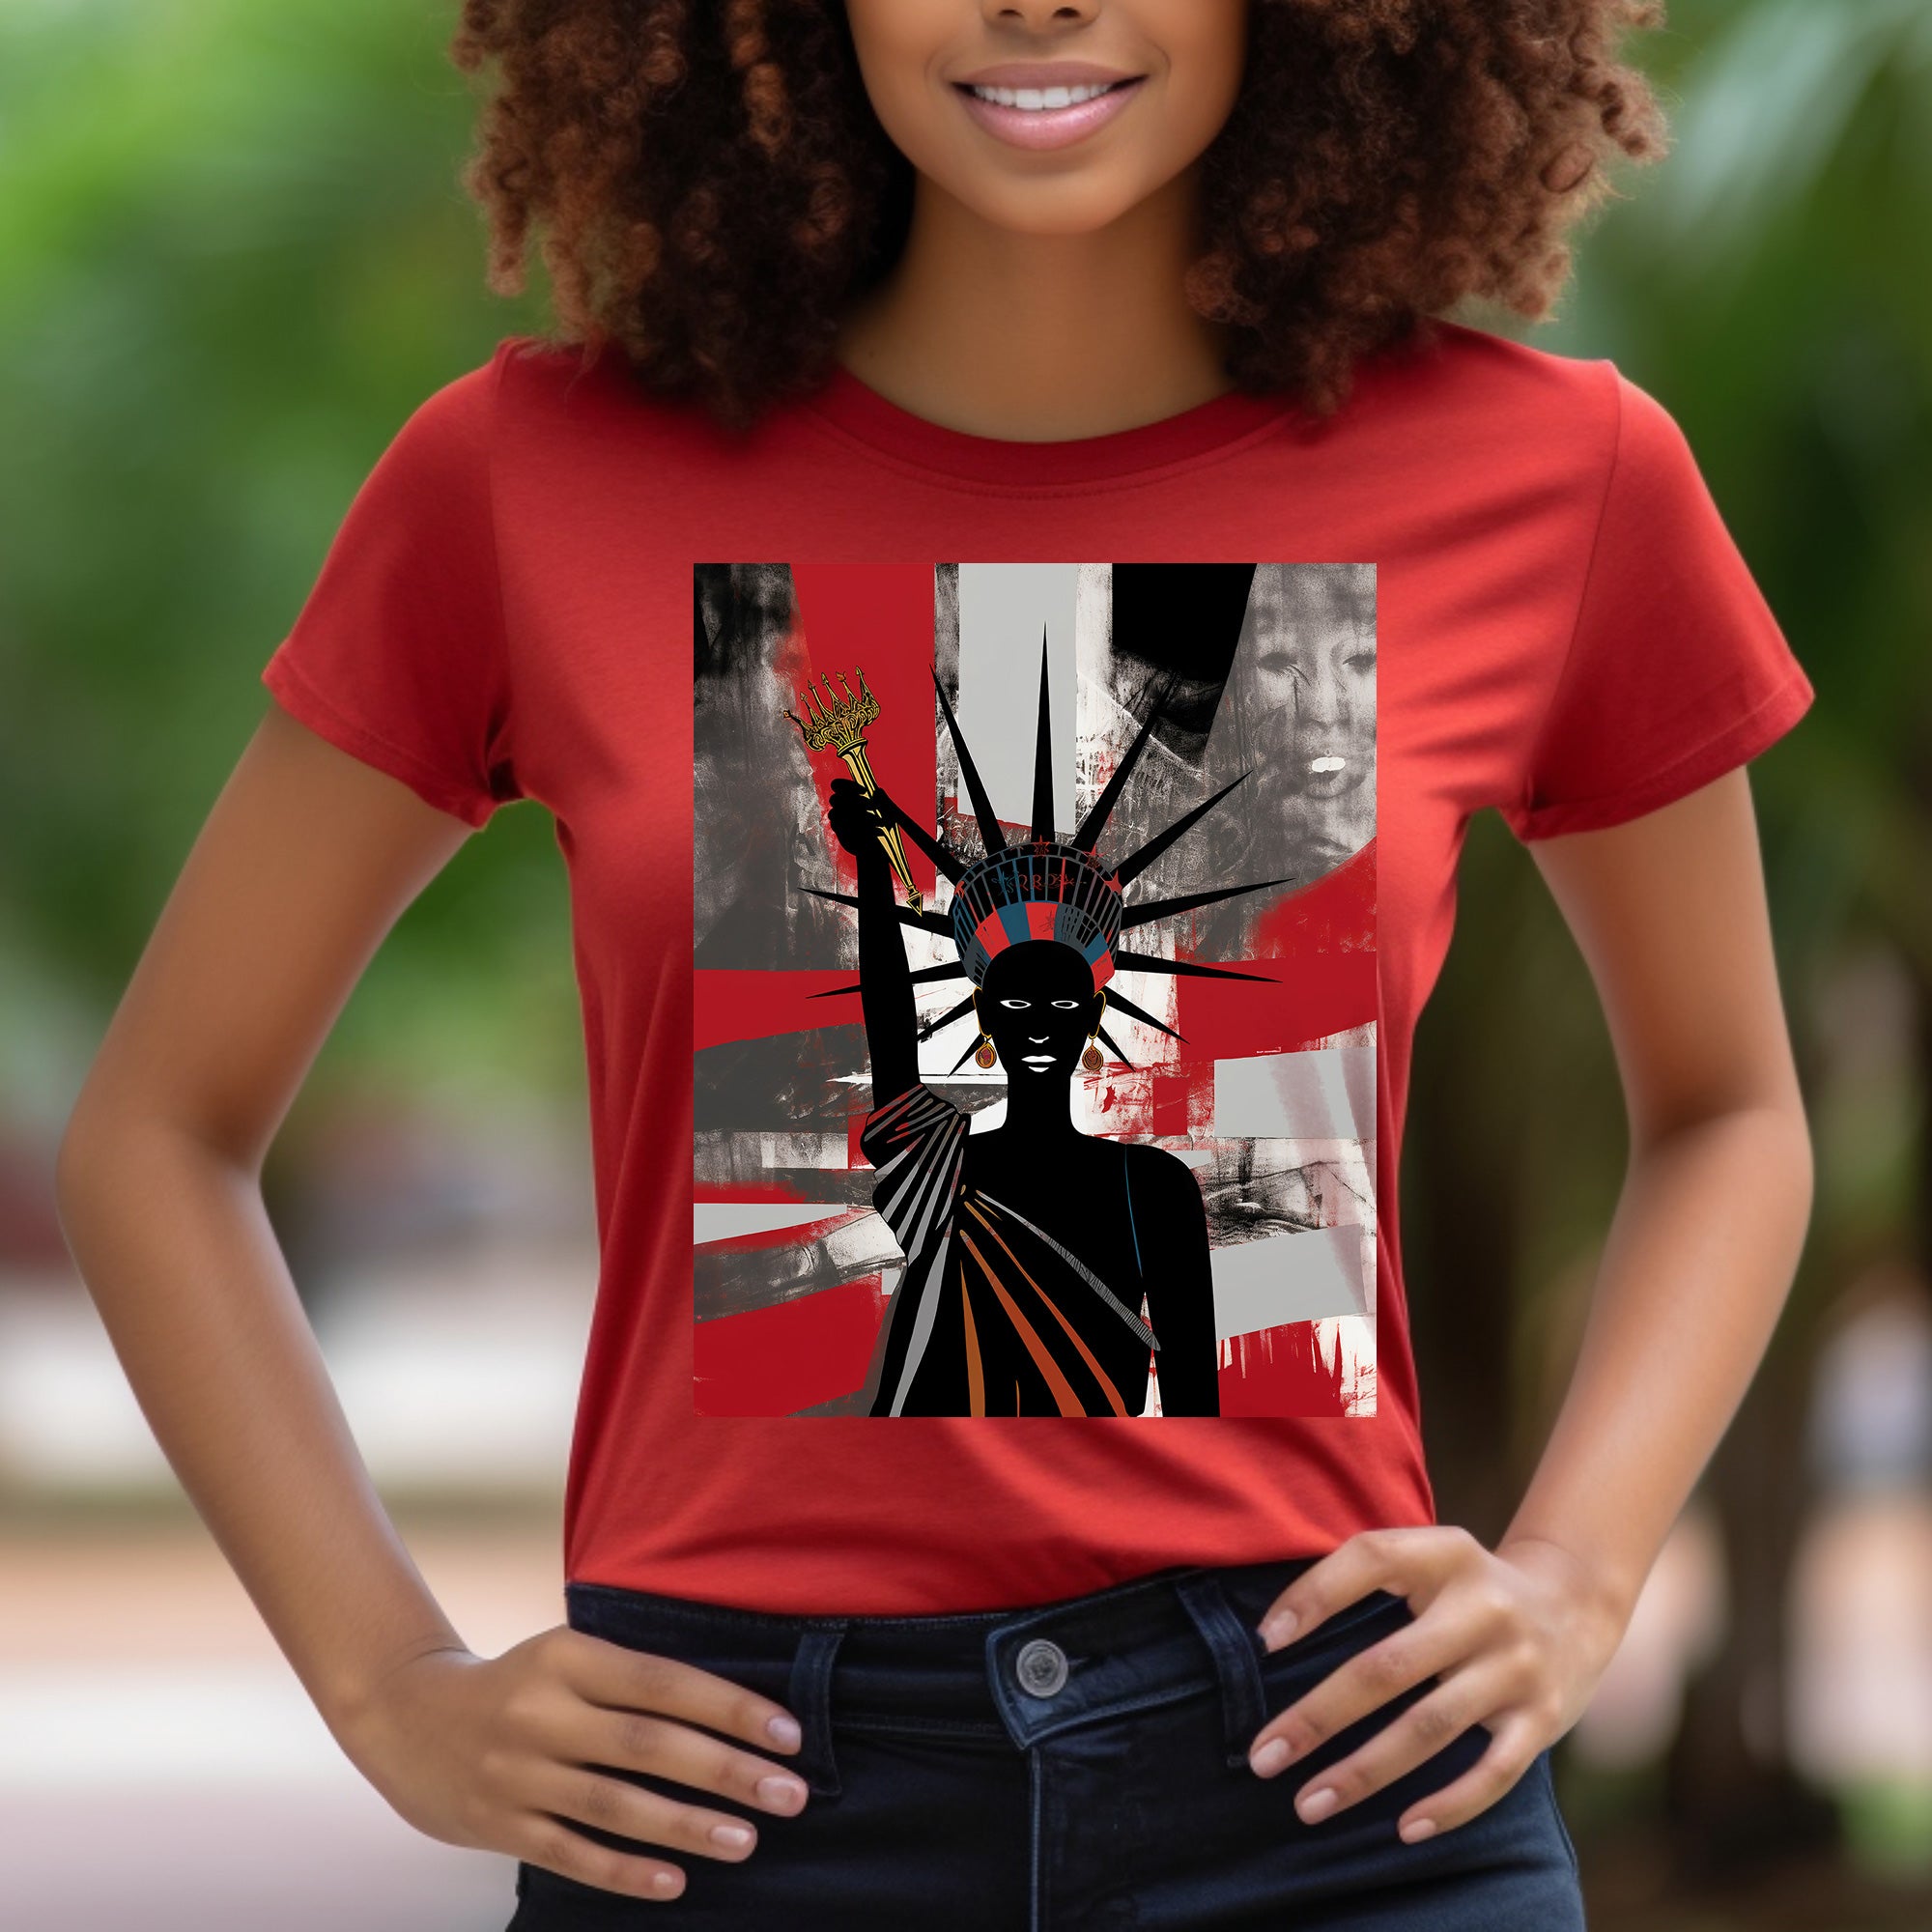 Black Woman Statue of Liberty Tee in red.